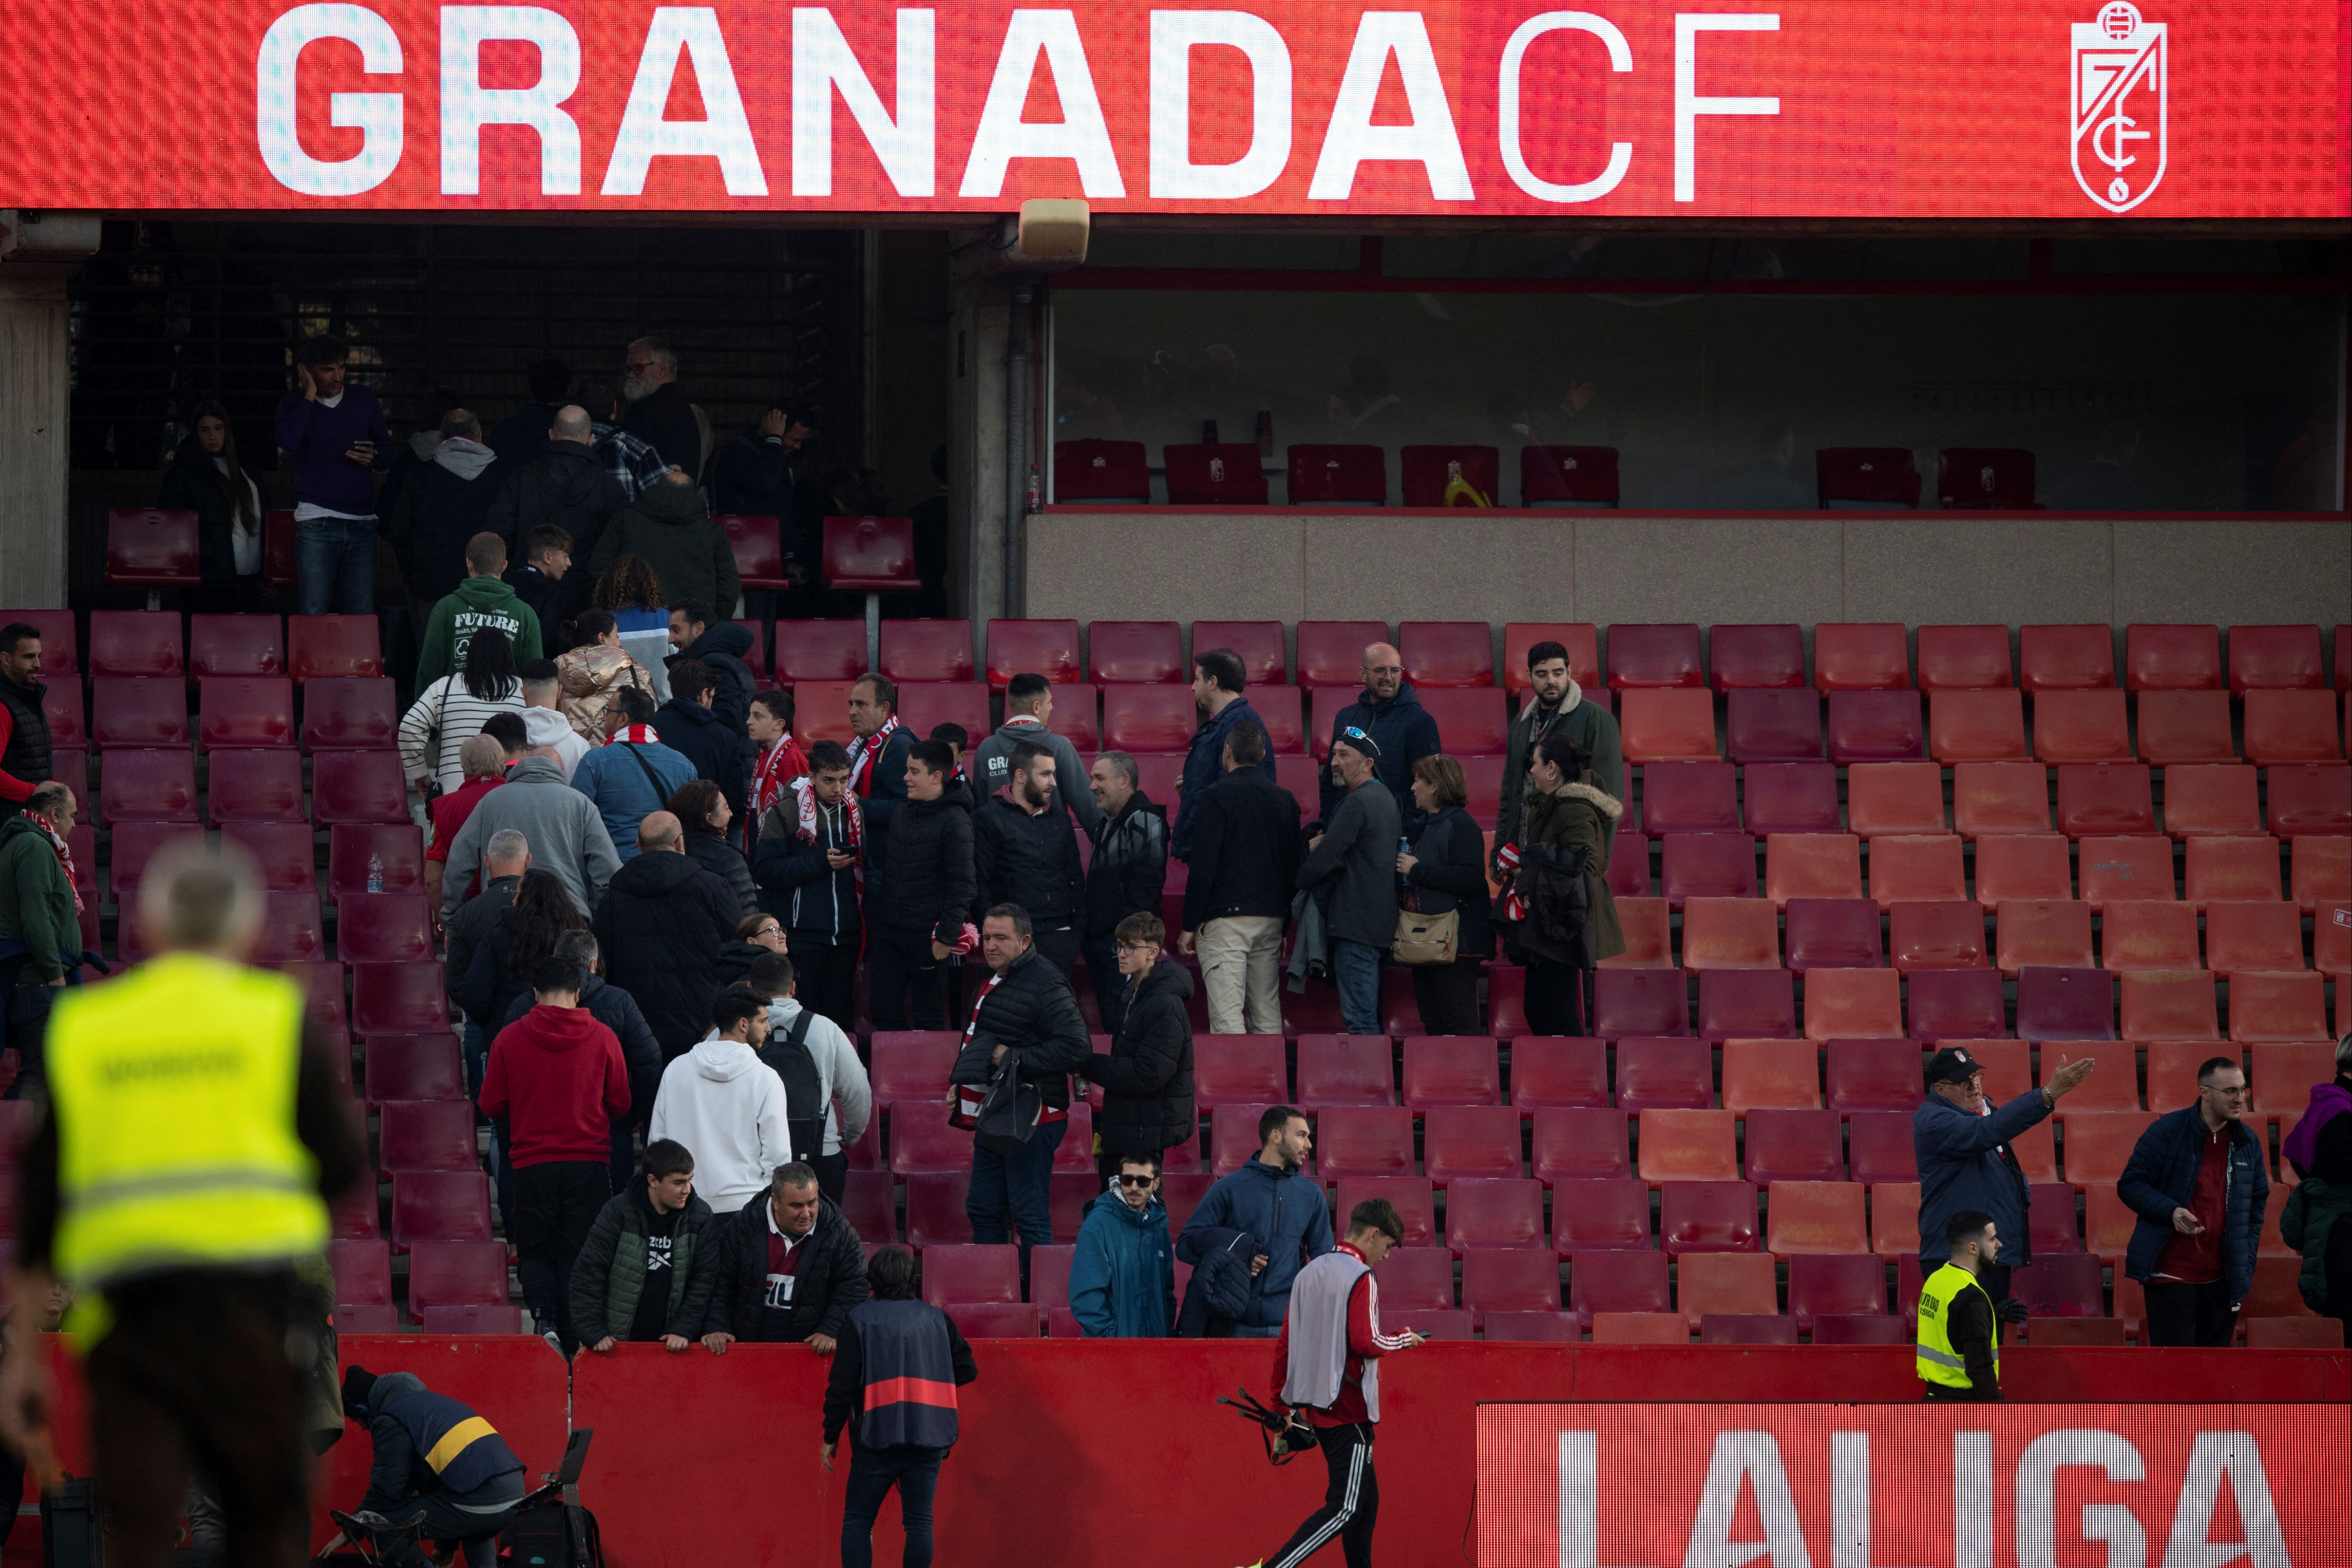 The death of a fan in the stands caused the abandonment